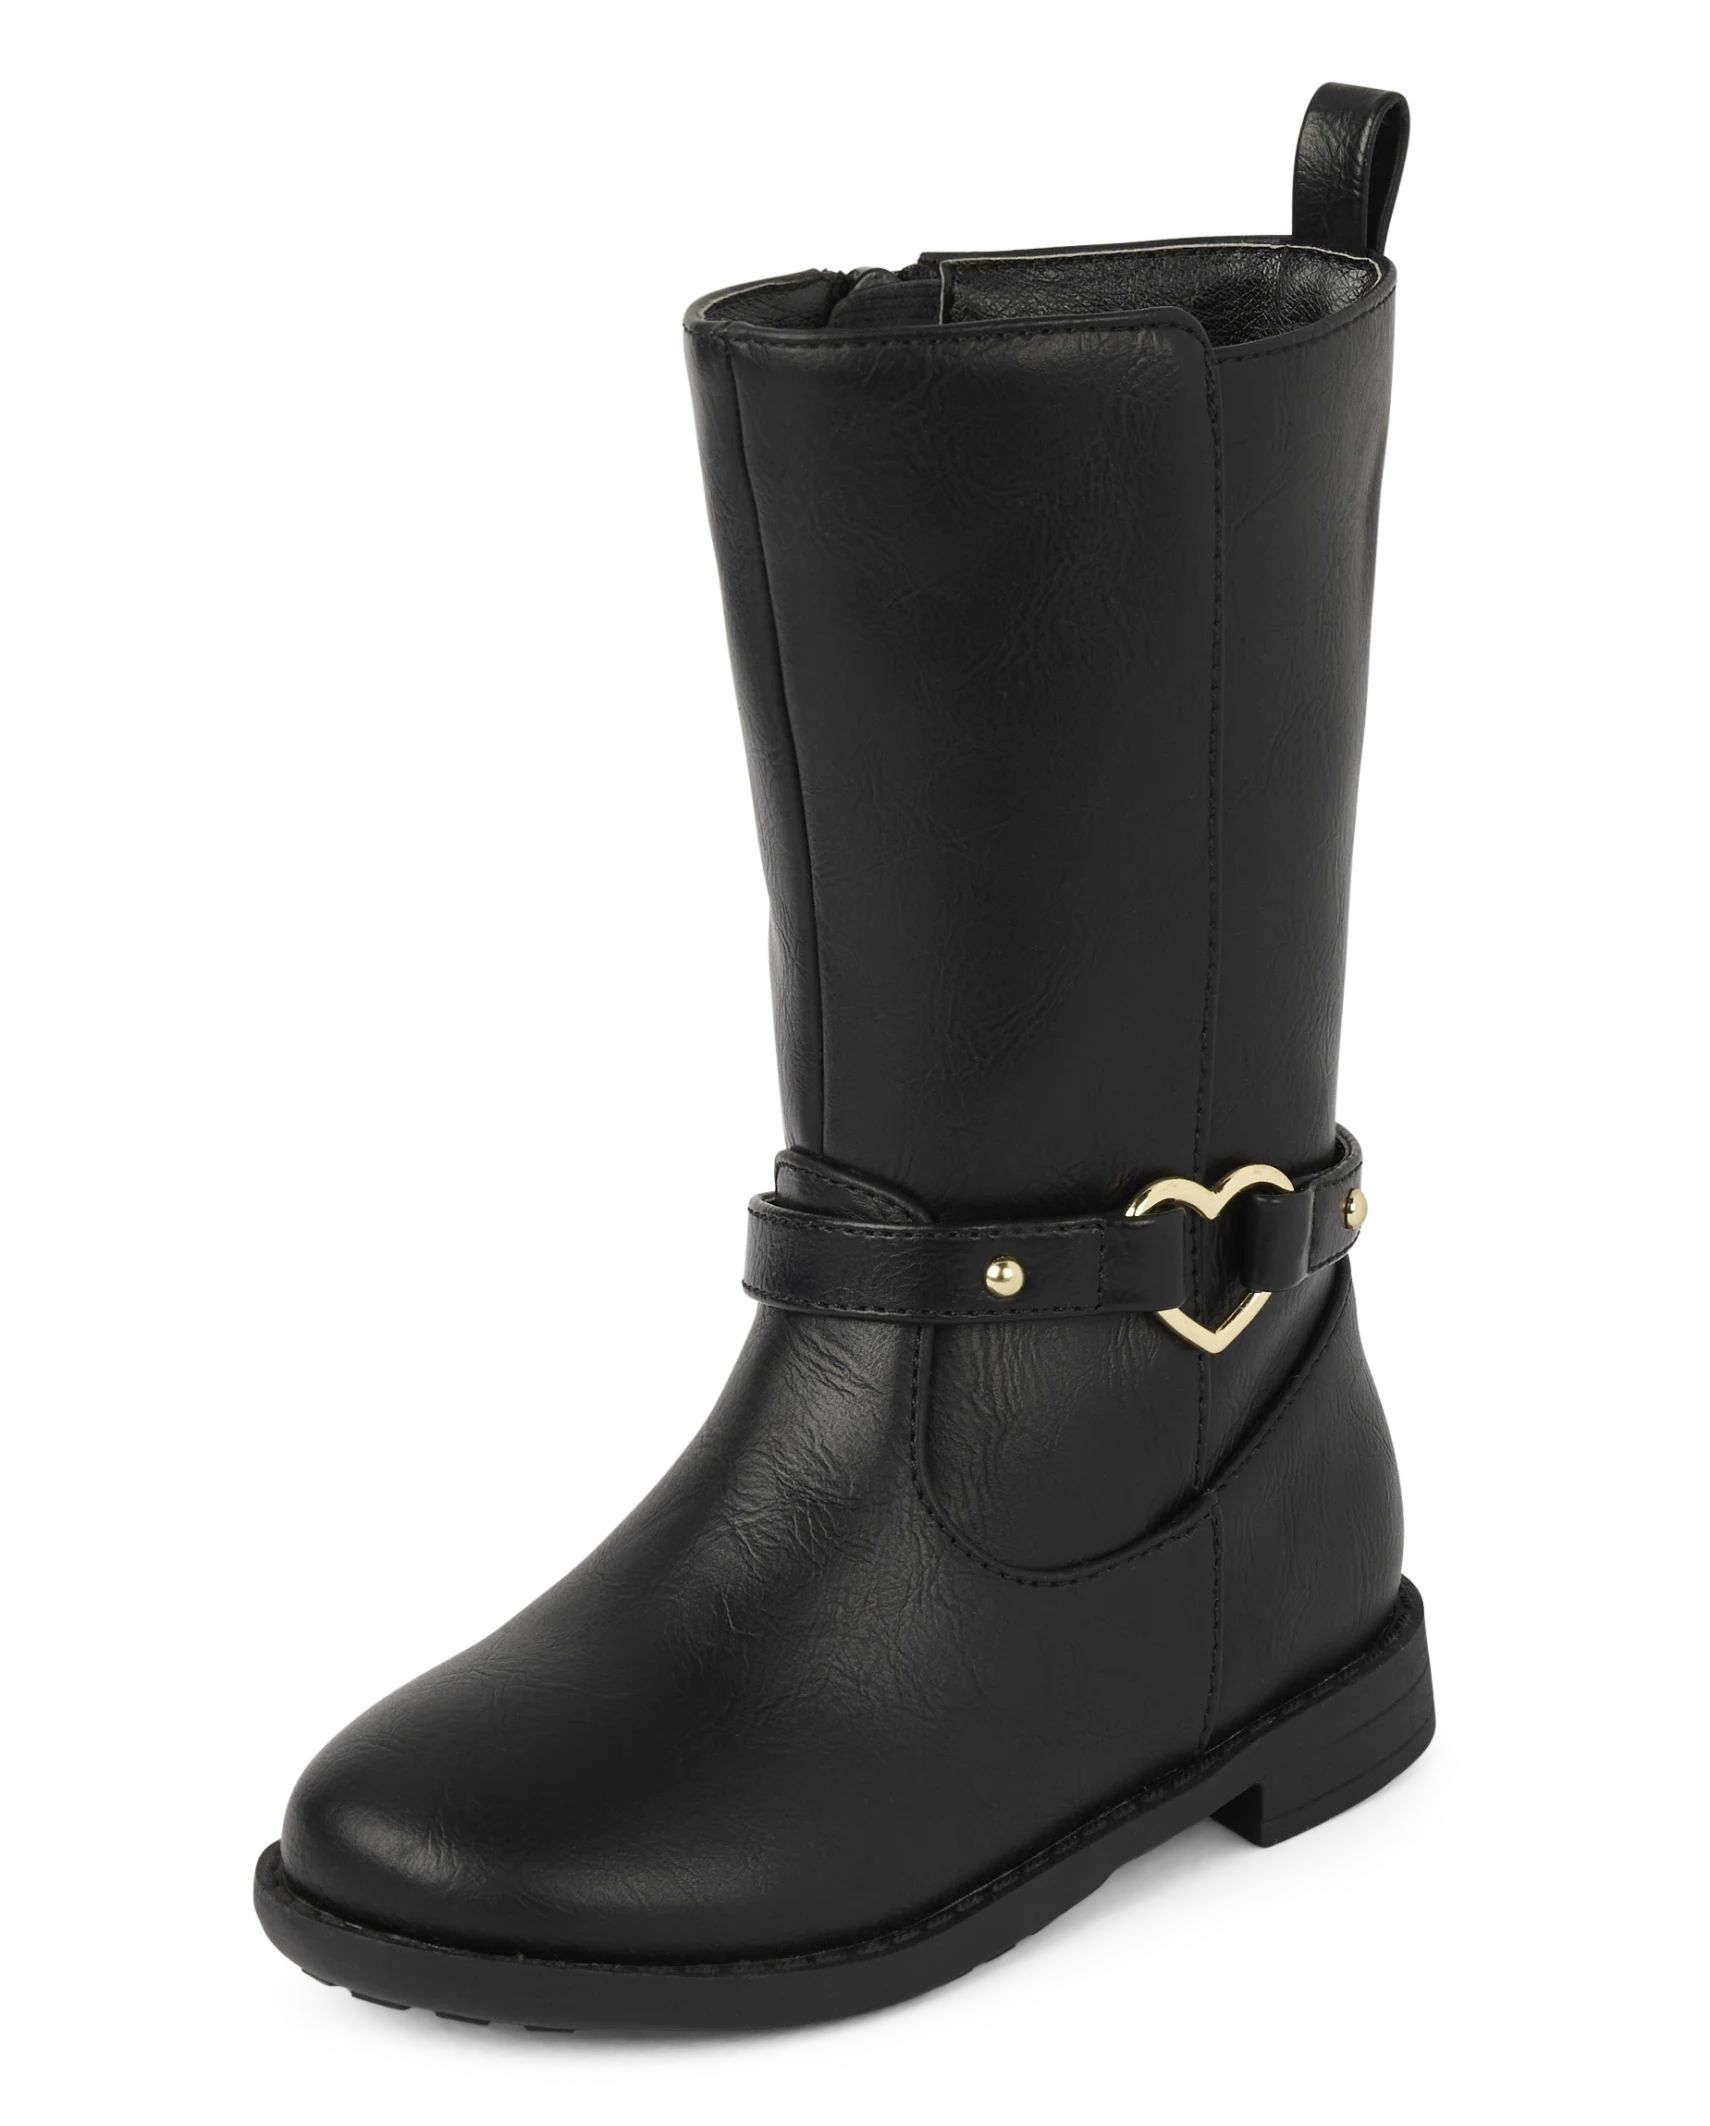 Toddler Girls Heart Buckle Tall Boots - black | The Children's Place